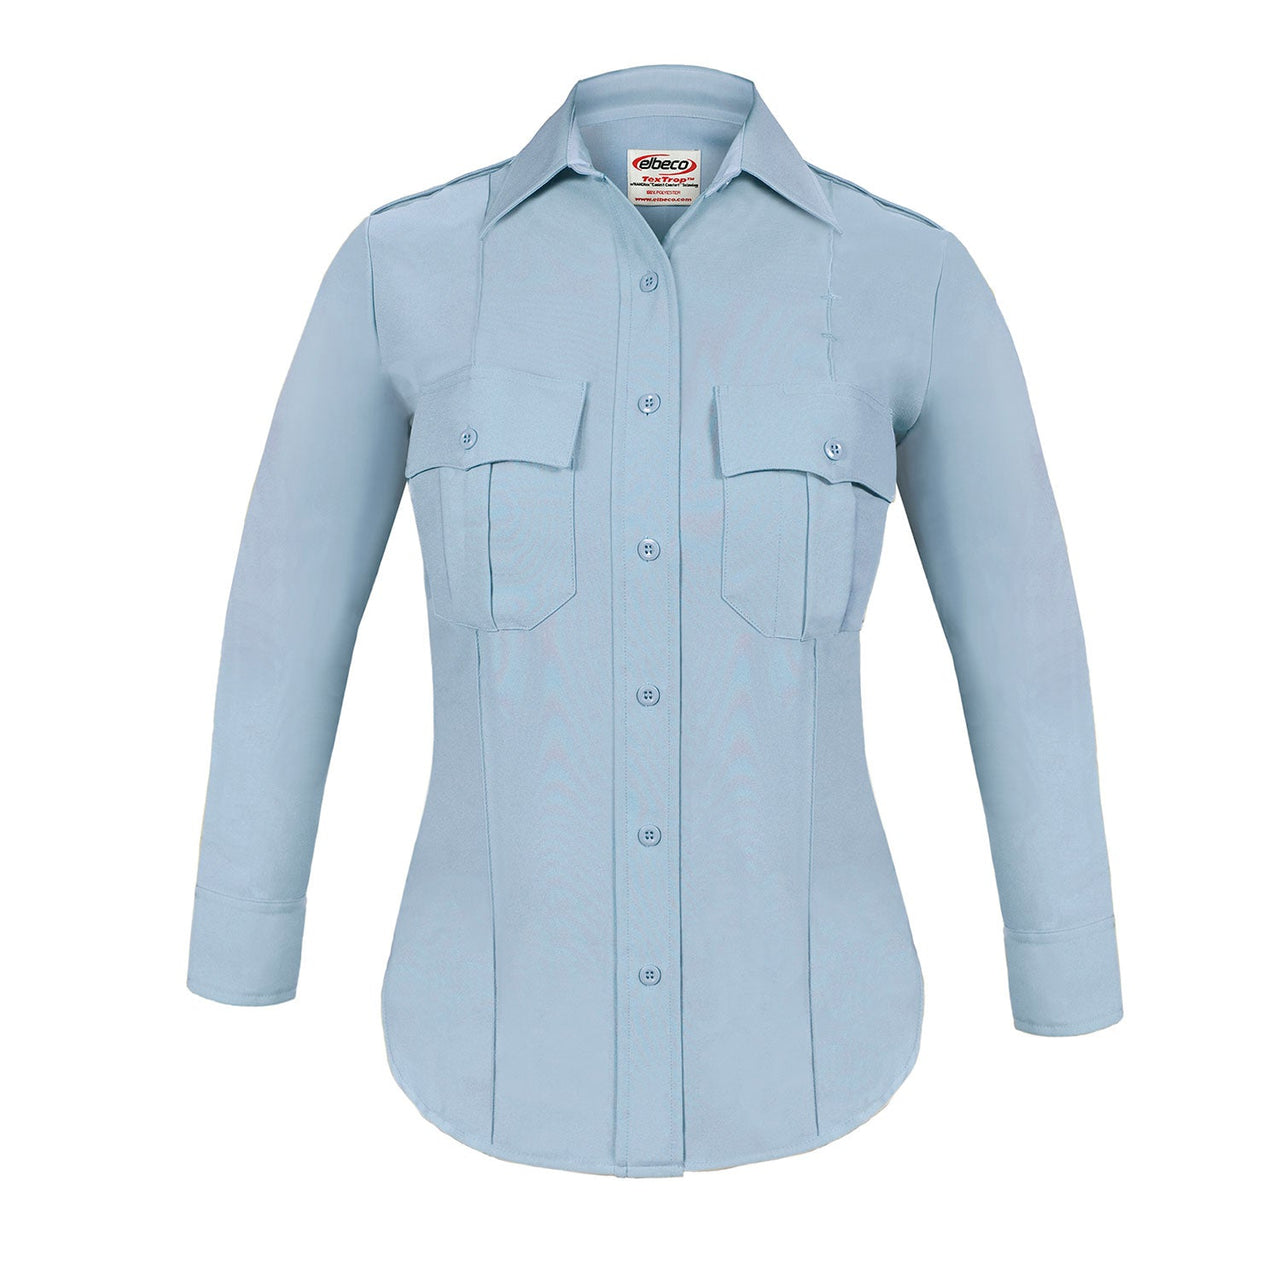 the TexTrop2 Long Sleeve Women's Uniform Shirt | French Blue Moisture Wicking Police Duty Shirt for Women has patch pockets and a pointed collar